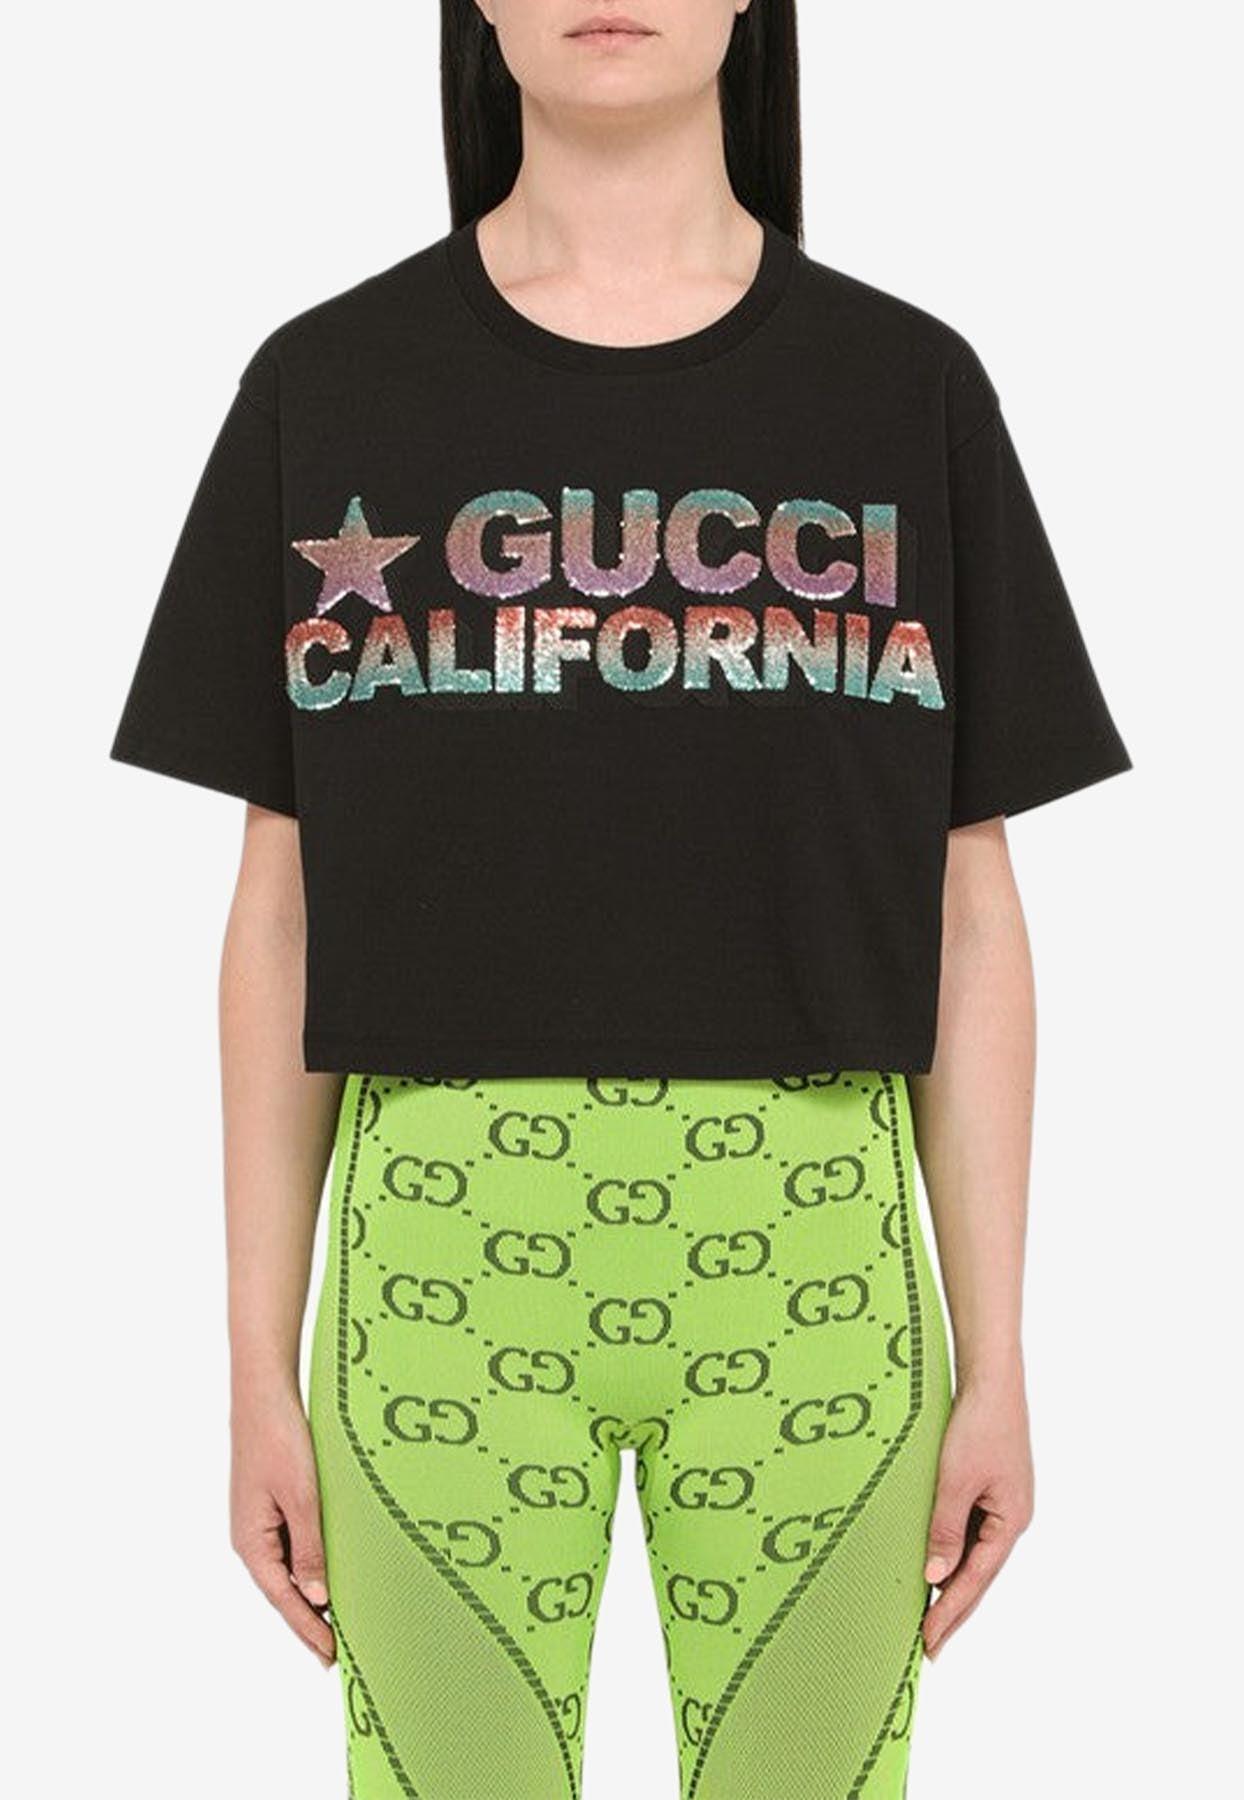 GUCCI Cropped top in black